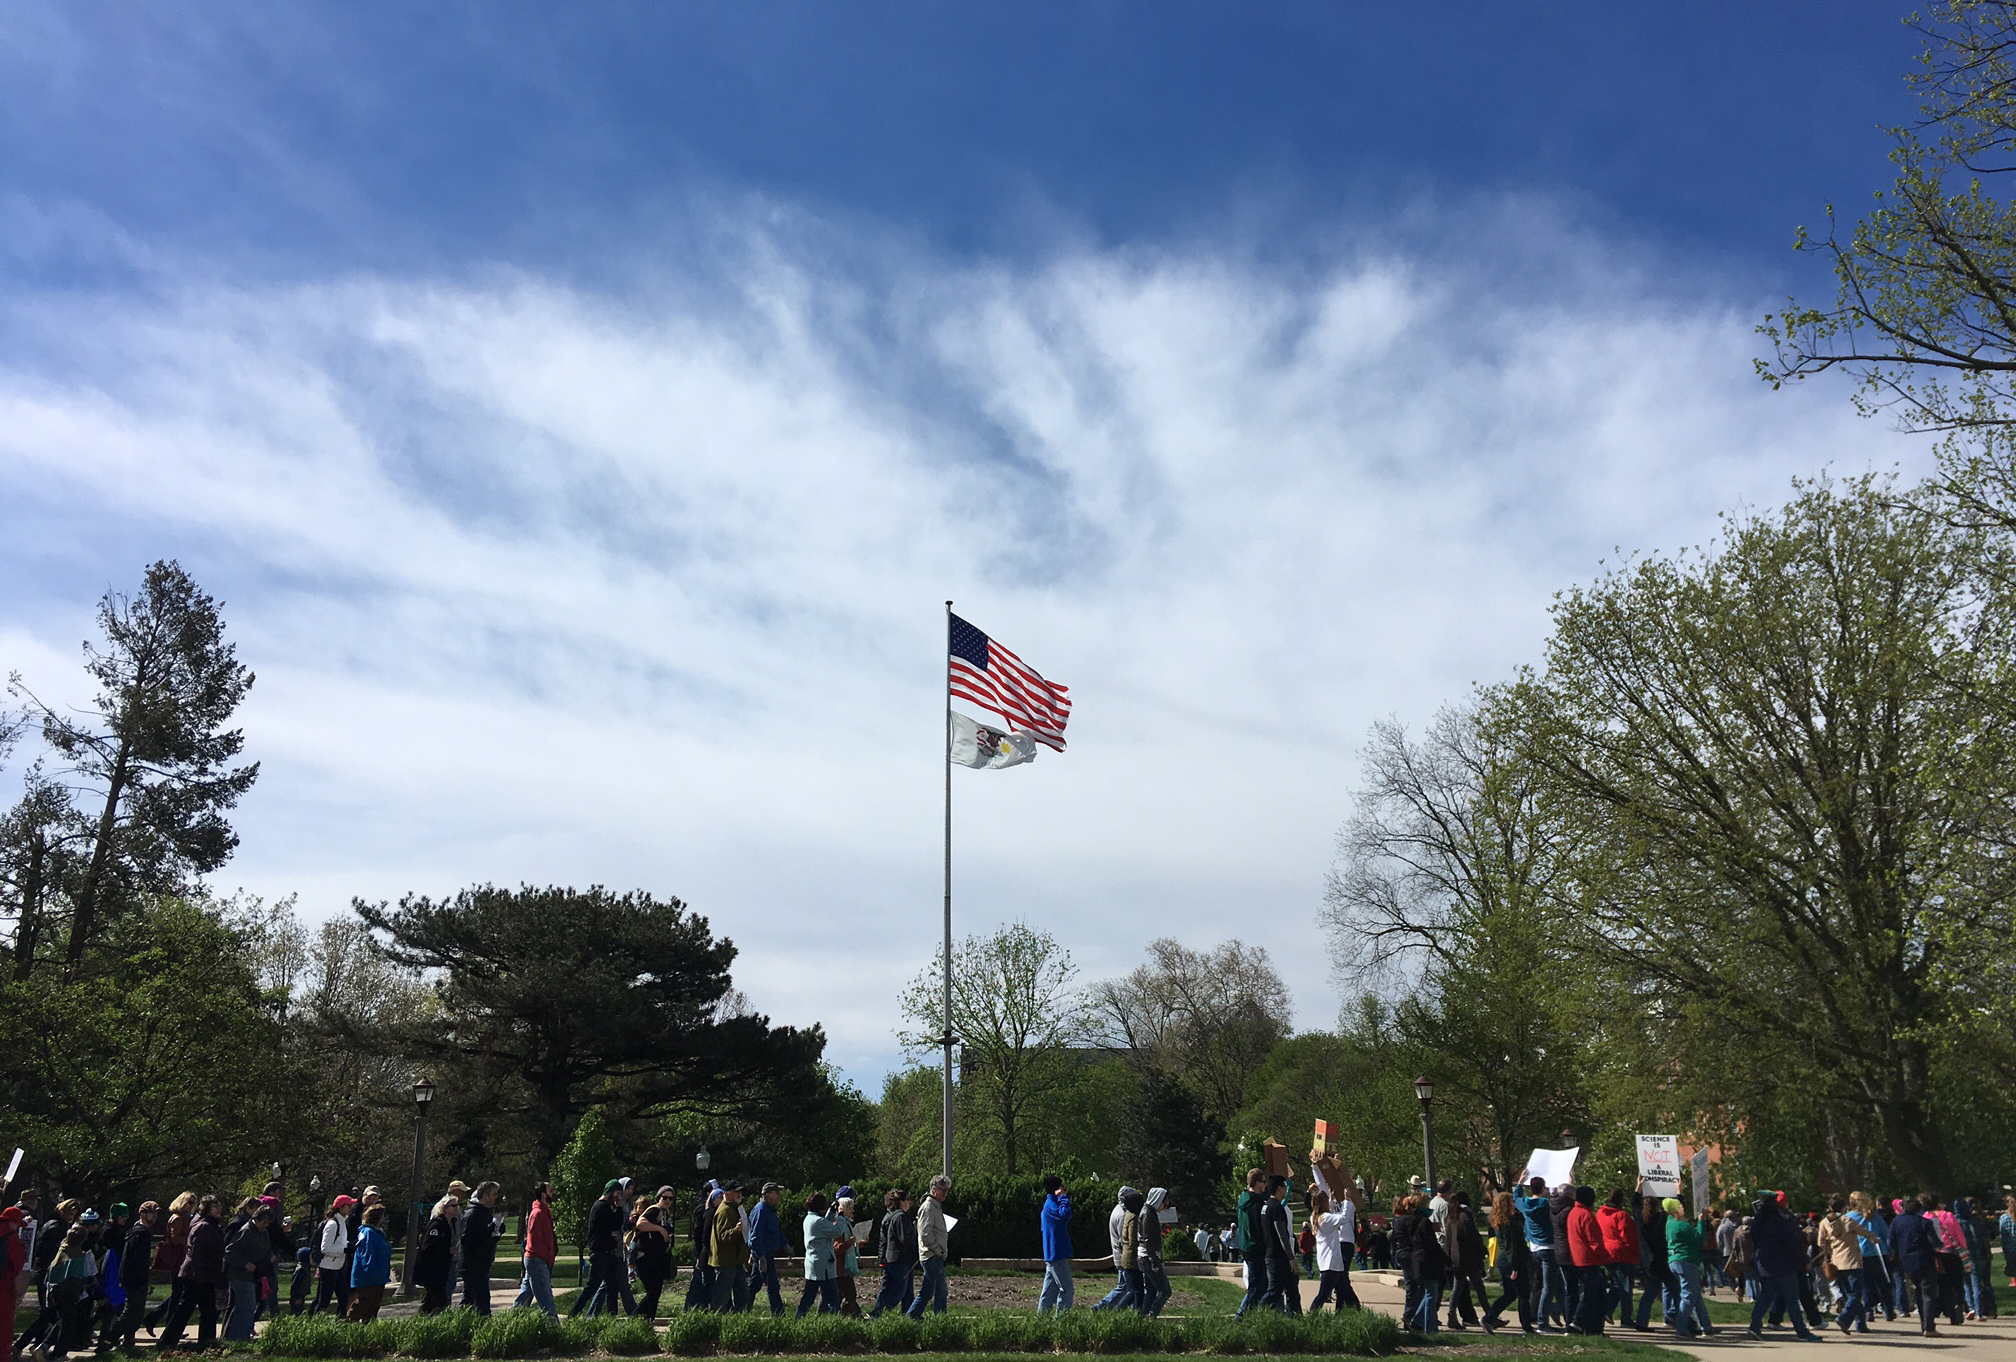 Marchers pass by the flagpole on Illinois State's Quad during the March for Science in Normal. (Photo by Megan Kathol Bersett)